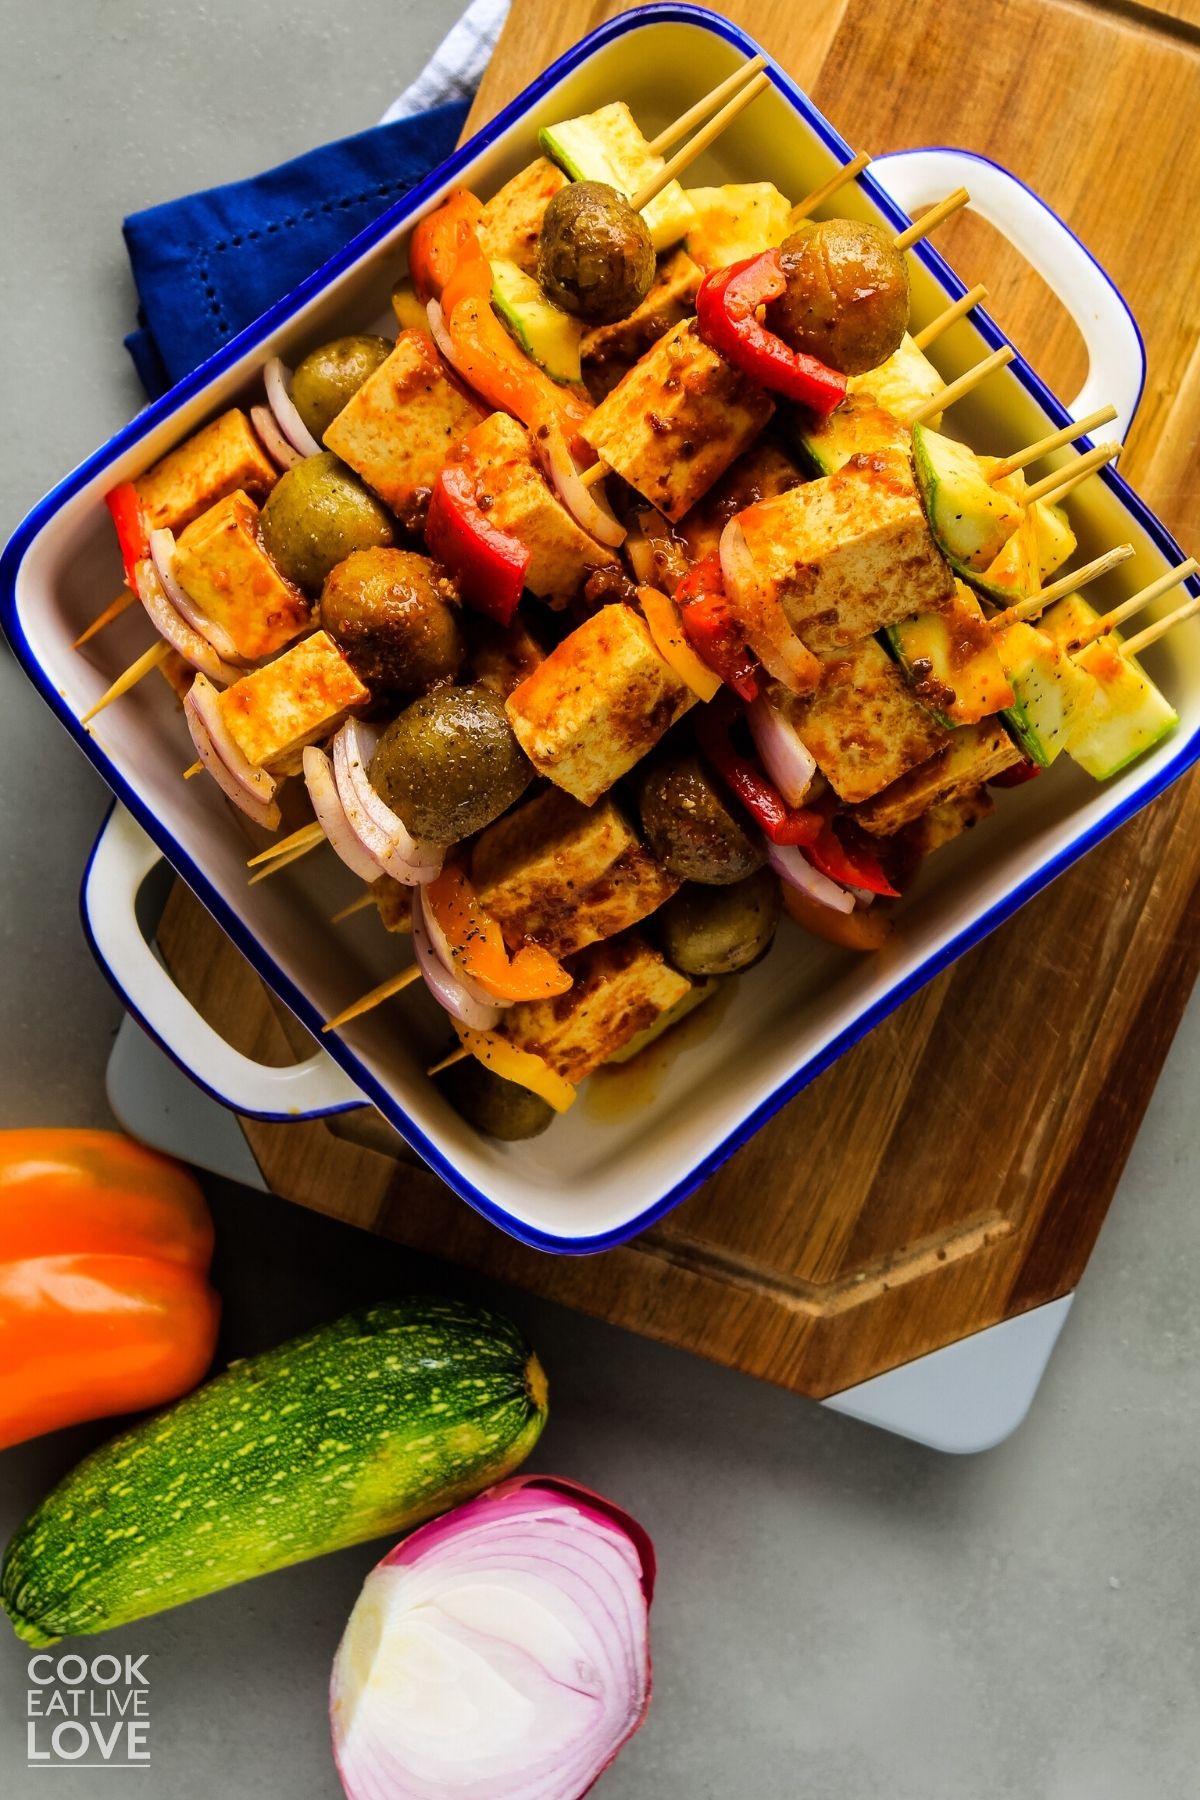 Vegetables and tofu are threaded onto skewers and ready for the grill.